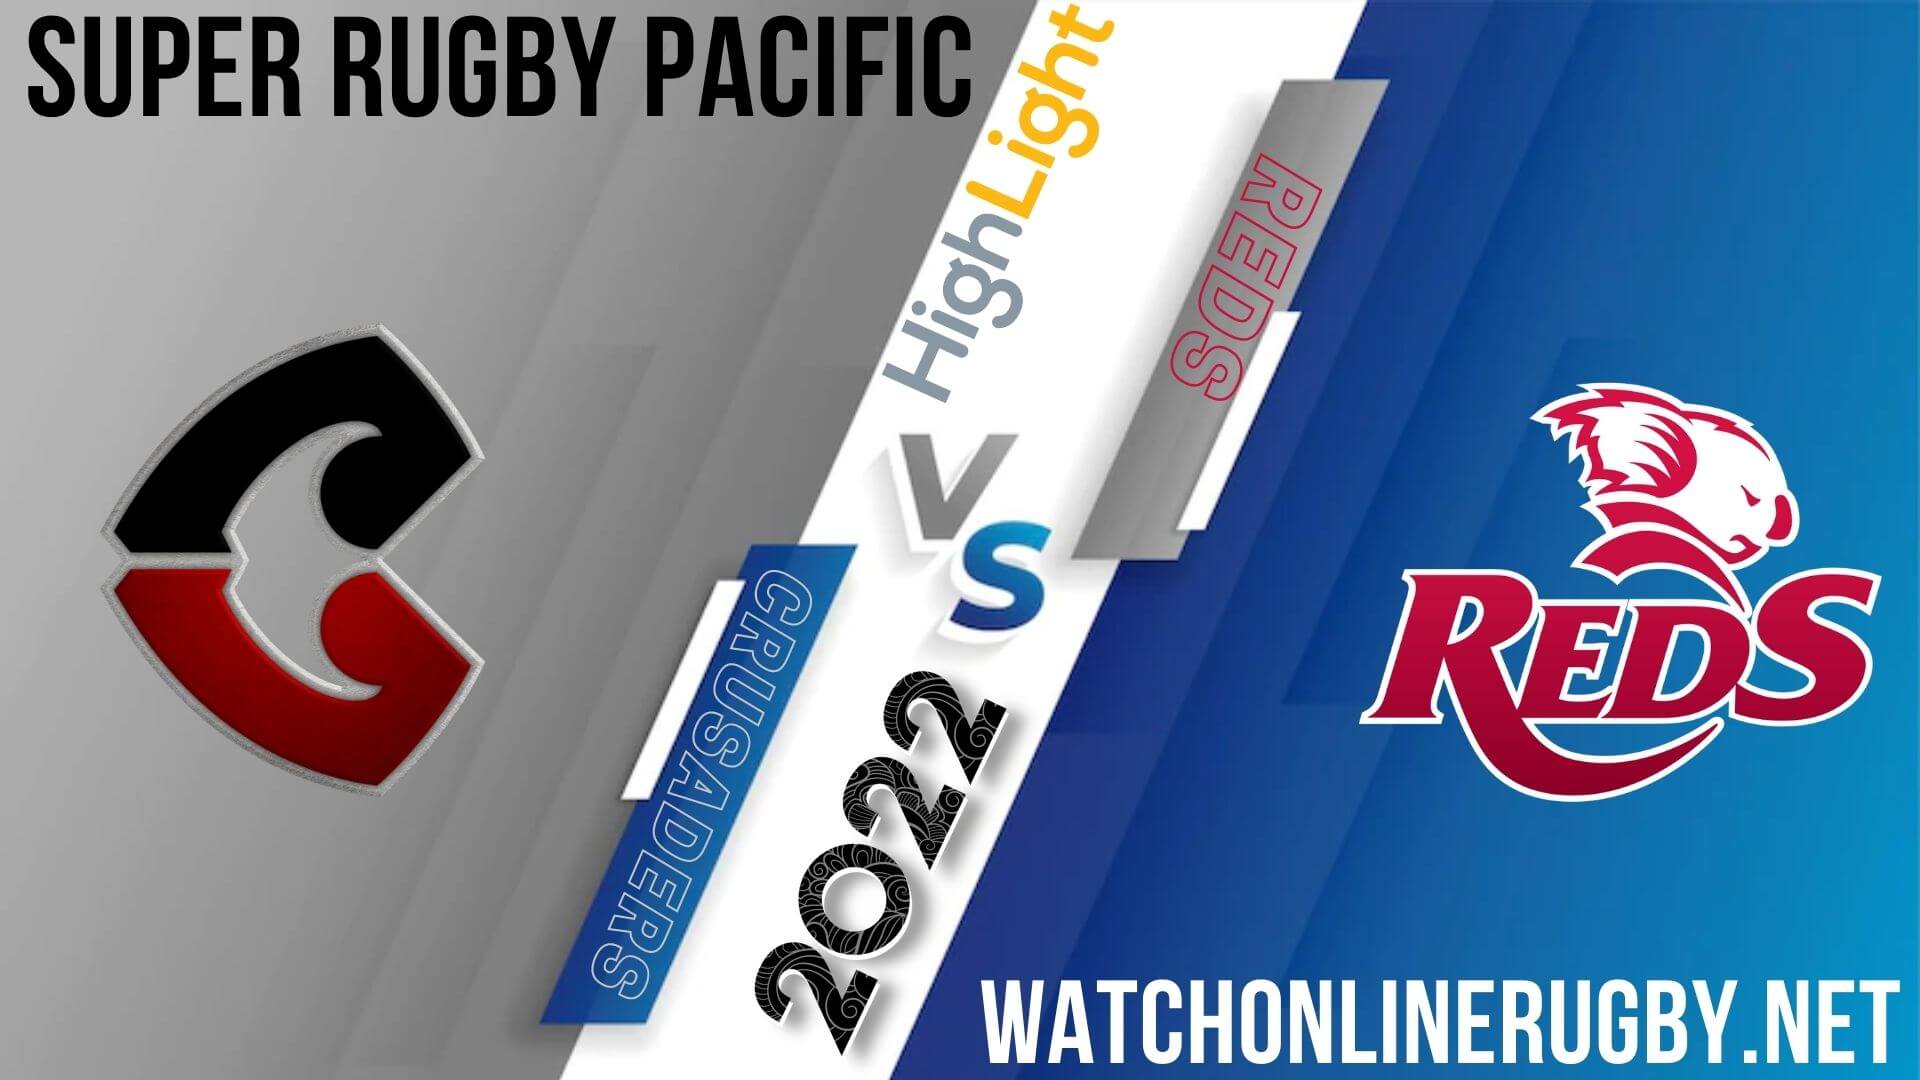 Crusaders Vs Reds Super Rugby Pacific 2022 RD 15